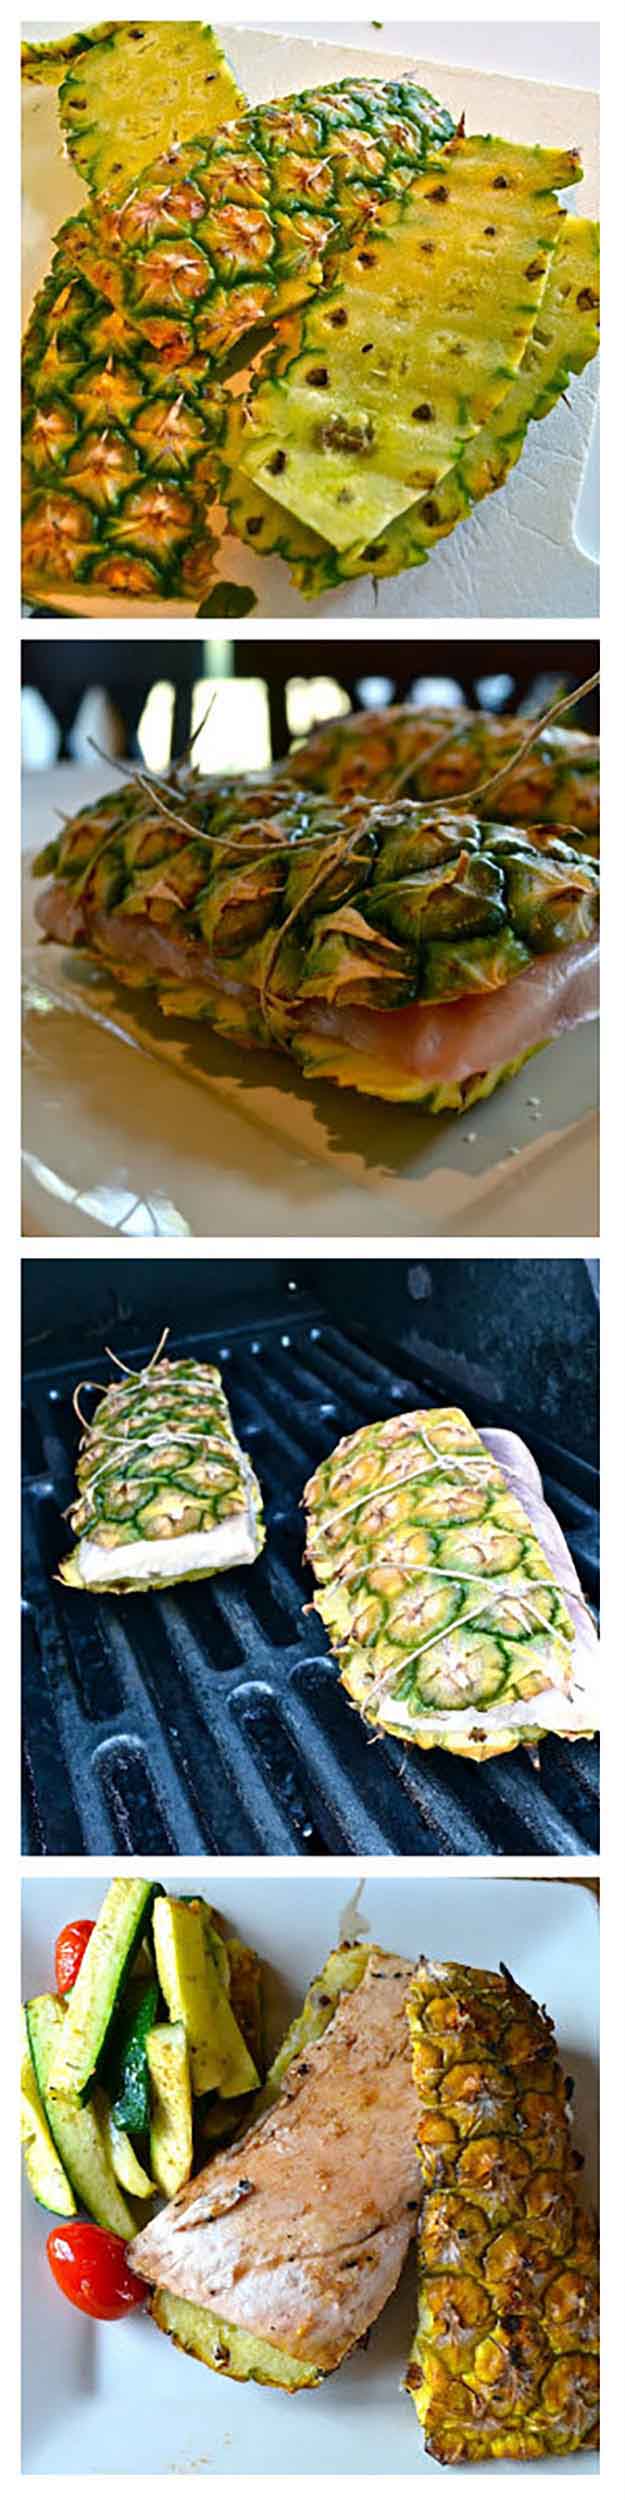 Healthy Fish Grilling Recipes | Easy Paleo Grilling Summer Recipes | Pineapple Plank Grilled Fish | DIY Projects & Crafts by DIY JOY at http://diyjoy.com/grilling-recipes-diy-bbq-ideas